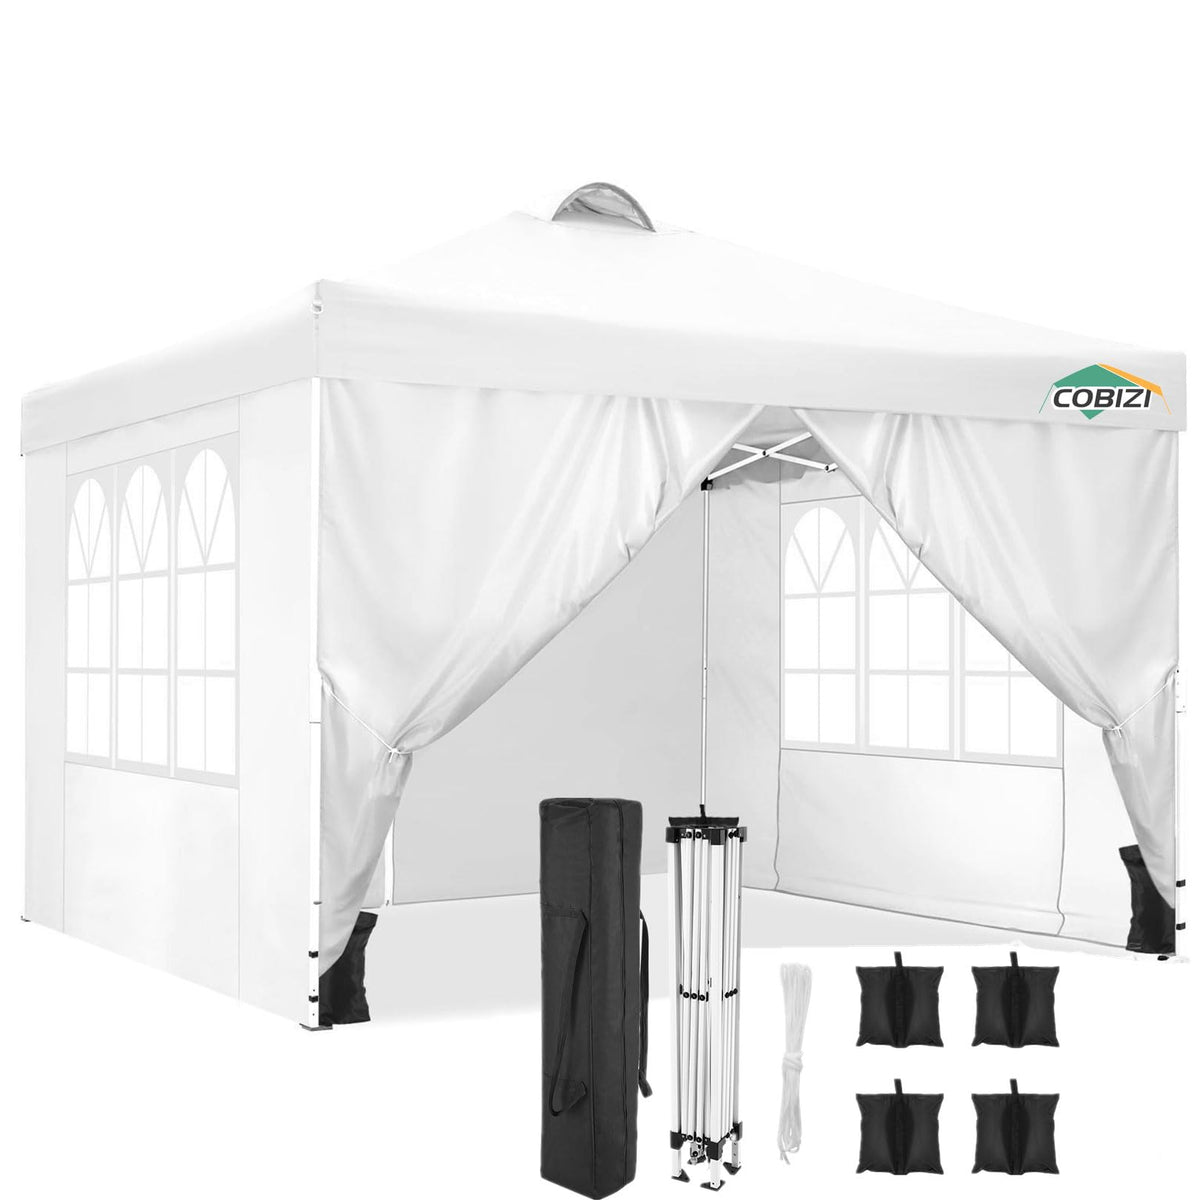 COBIZI Canopy 10x10 Waterproof Pop up Canopy Tent with 4 Sidewalls Outdoor Event Shelter Tent for Parties Sun Shade Party Commercial Canopy